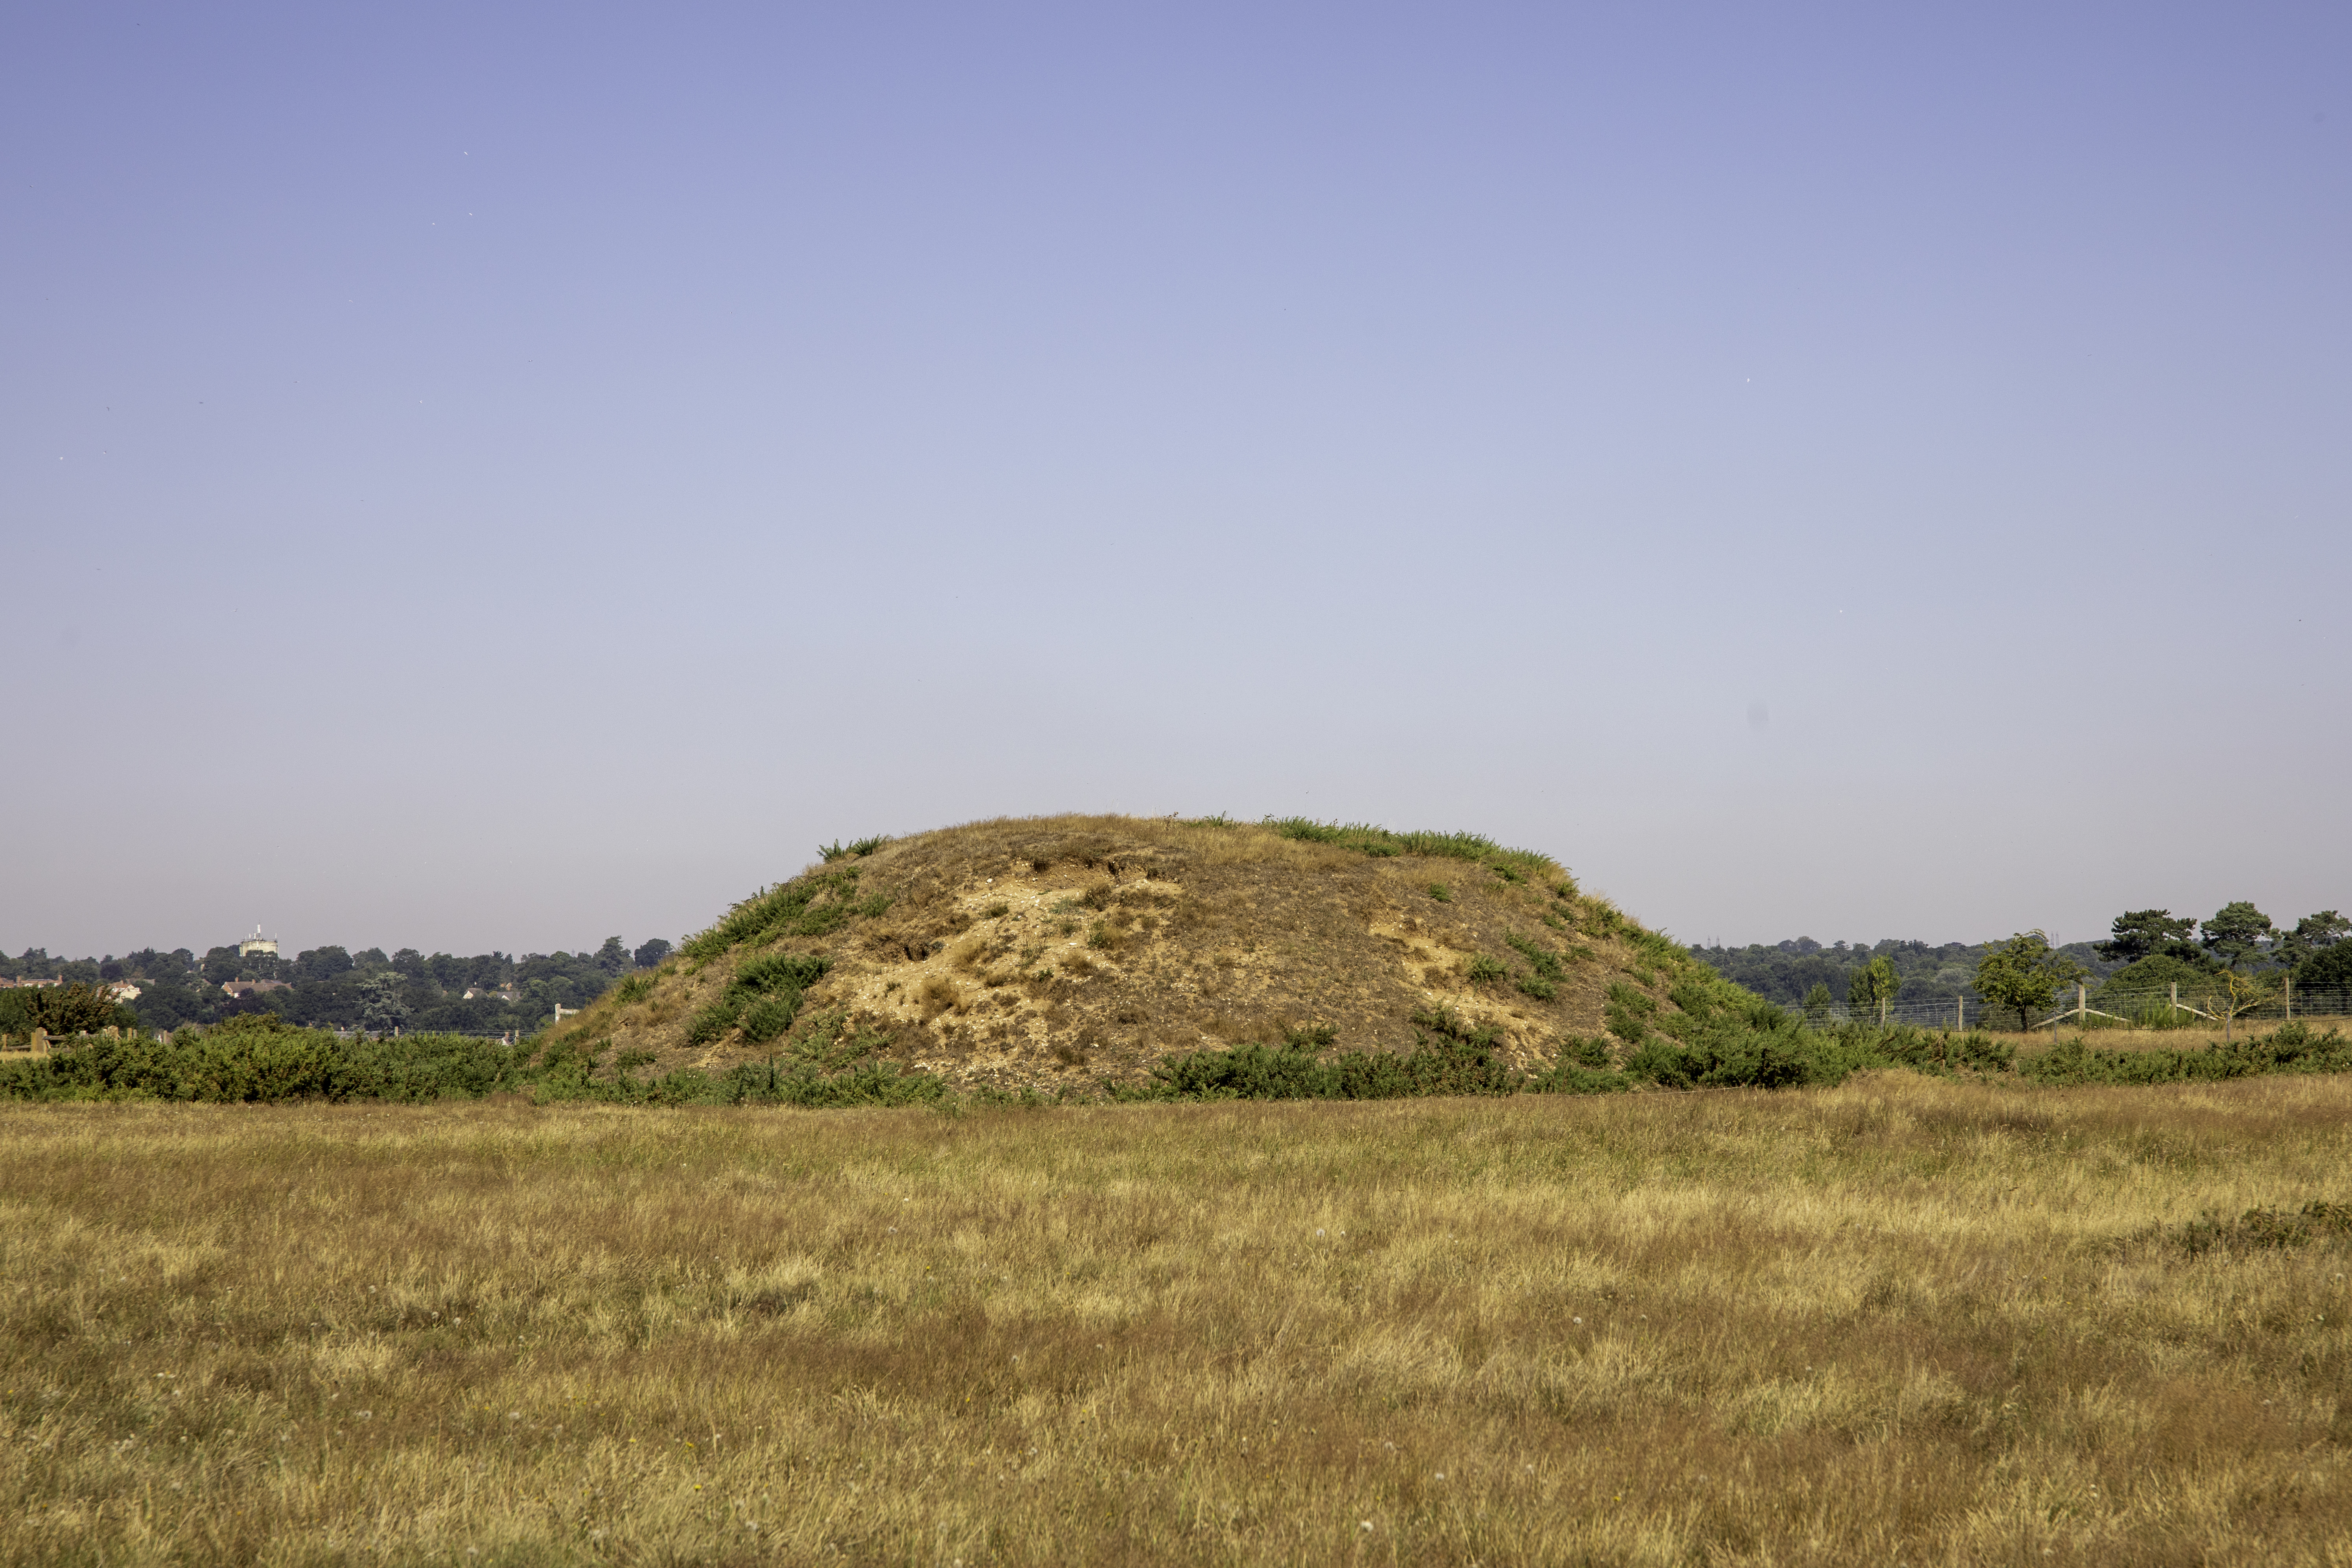 WOODBRIDGE, UNITED KINGDOM - Aug 07, 2020: Sutton Hoo estate, which is a National Trust property where the Longboat burial was found.